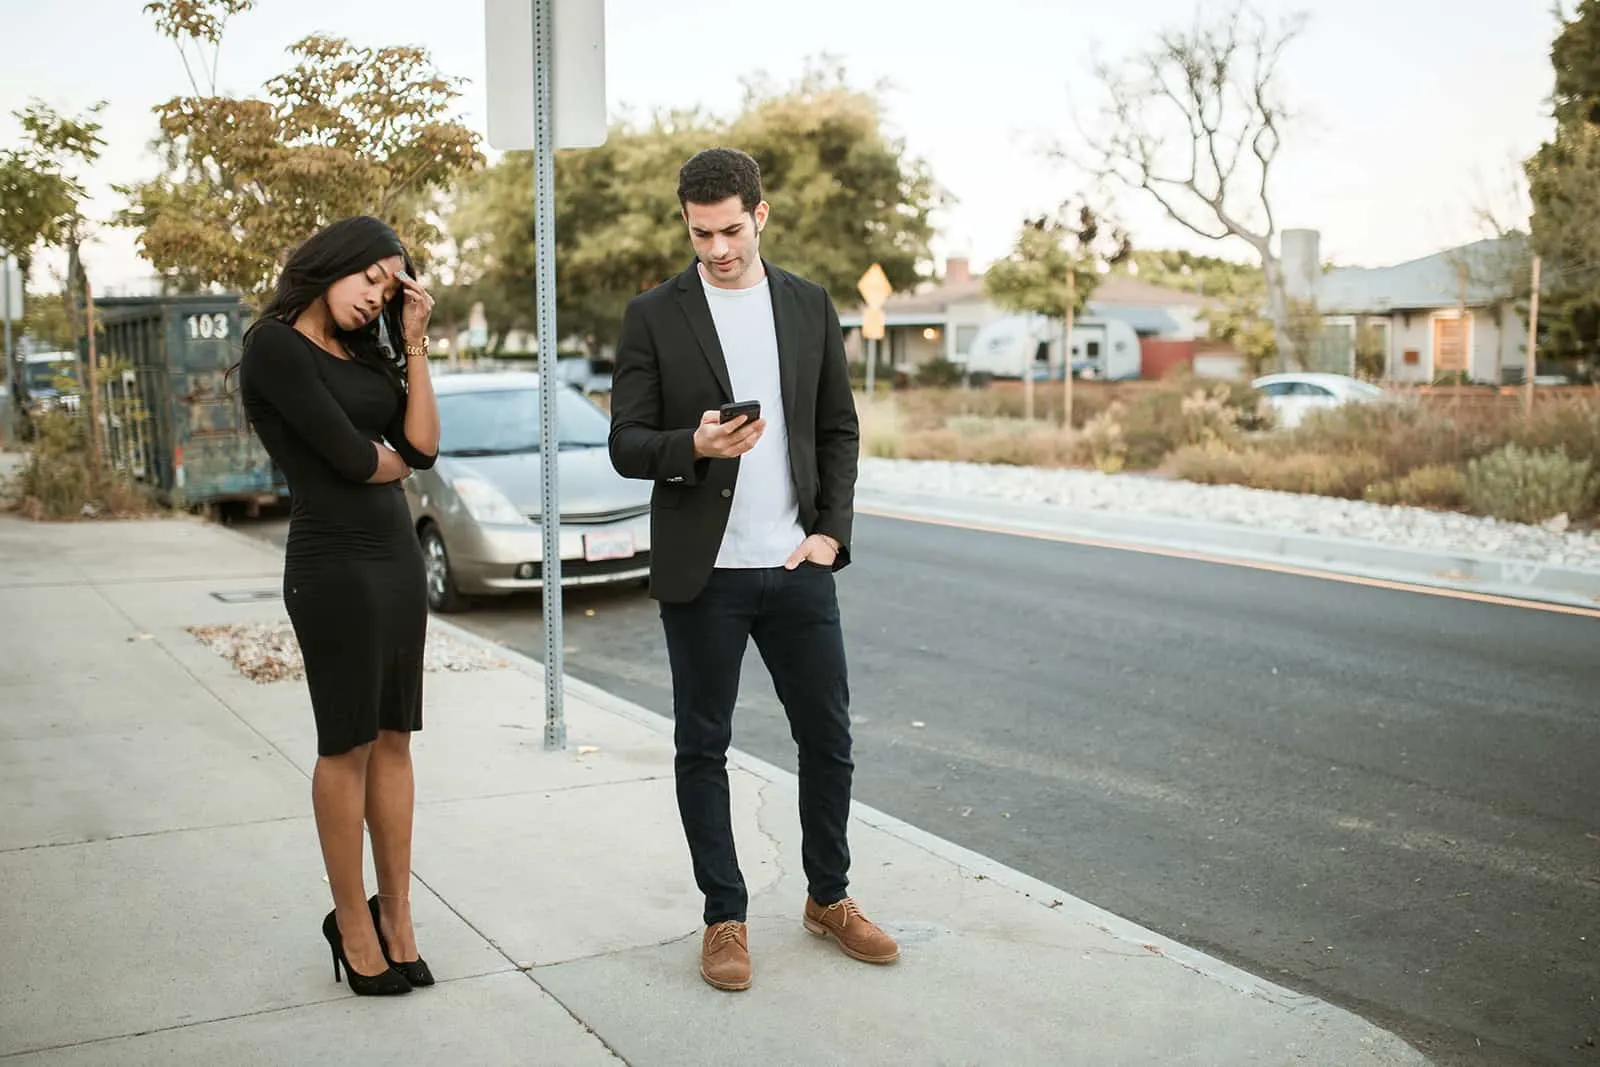 a jealous man checking smartphone of his girlfriend while standing together on the sidewalk